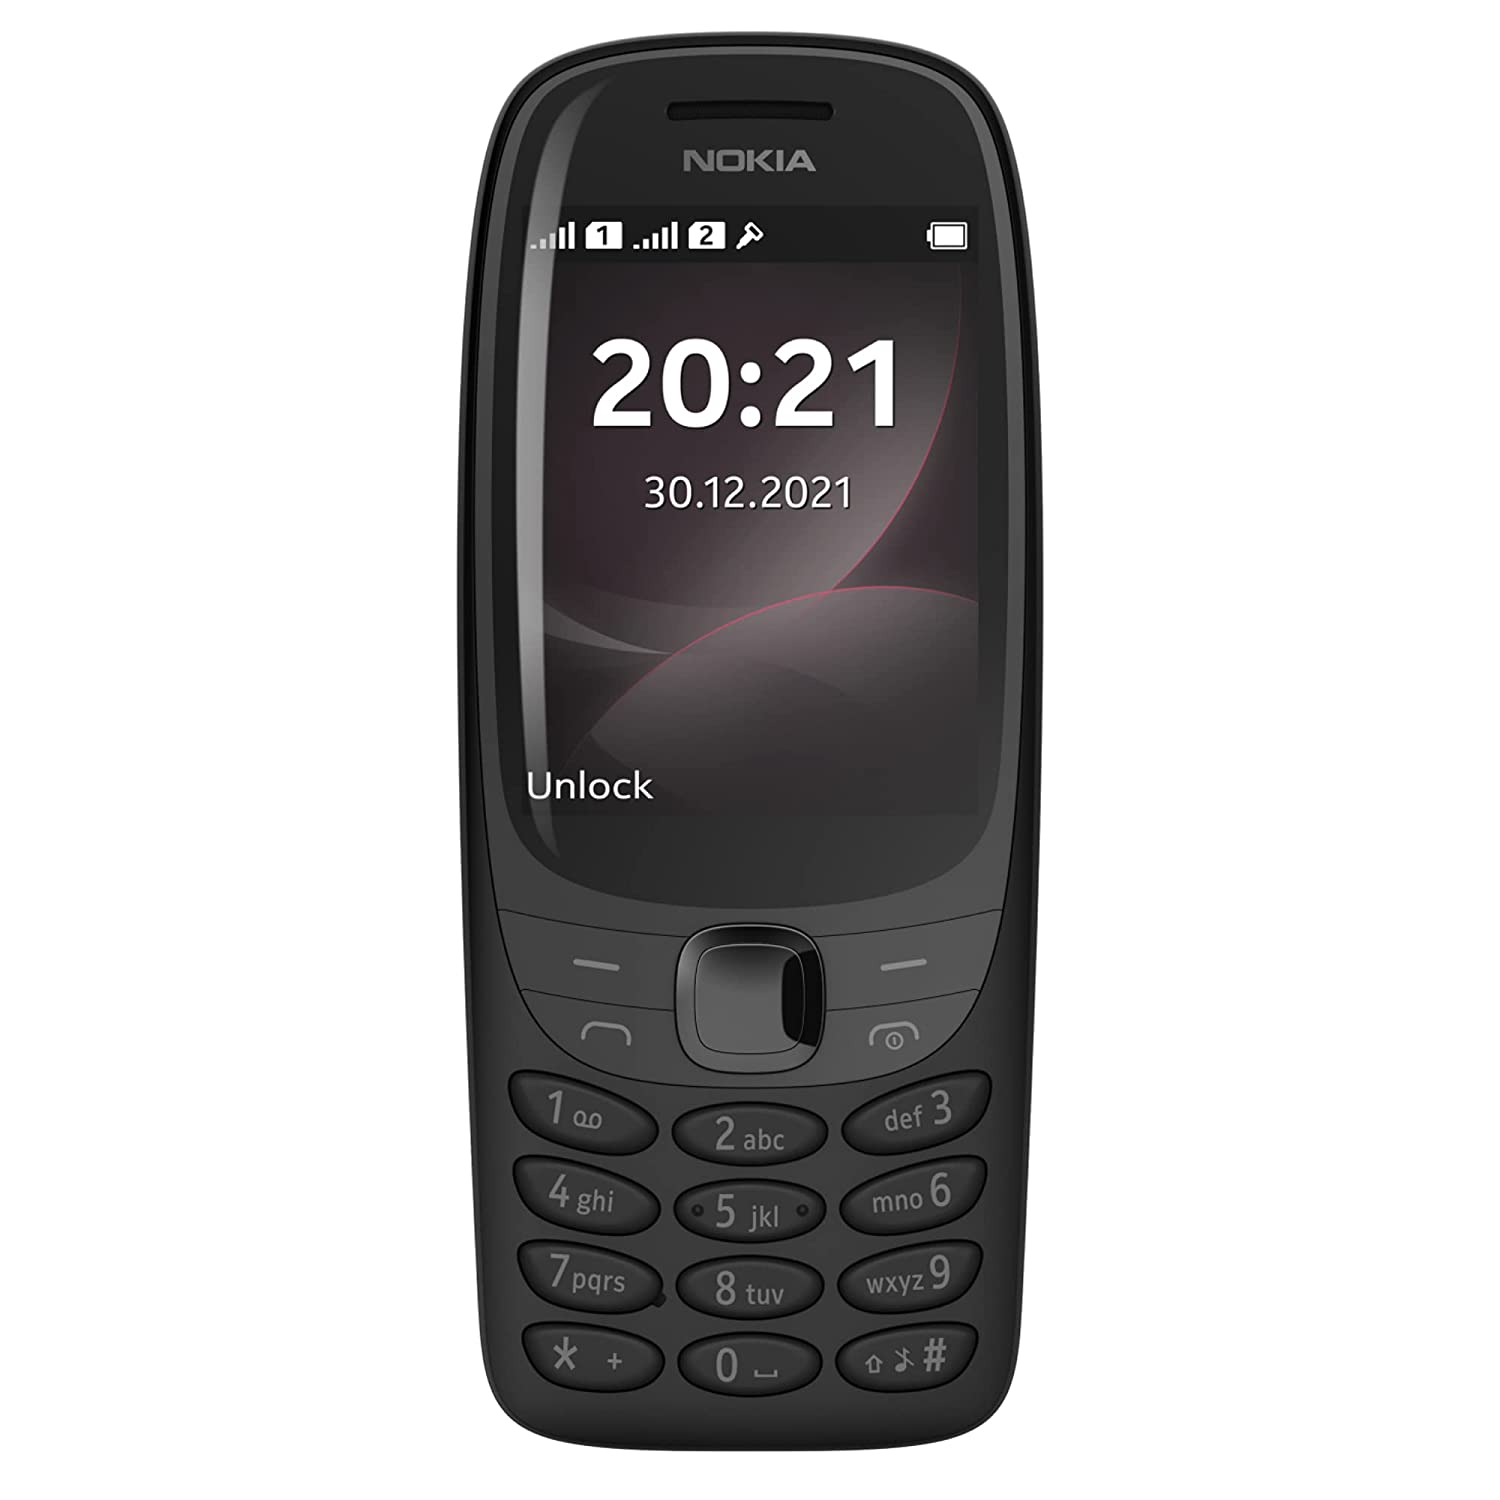 Nokia 6310 Dual SIM Feature Phone with a 2.8” Screen, Wireless FM Radio and Rear Camera | Black